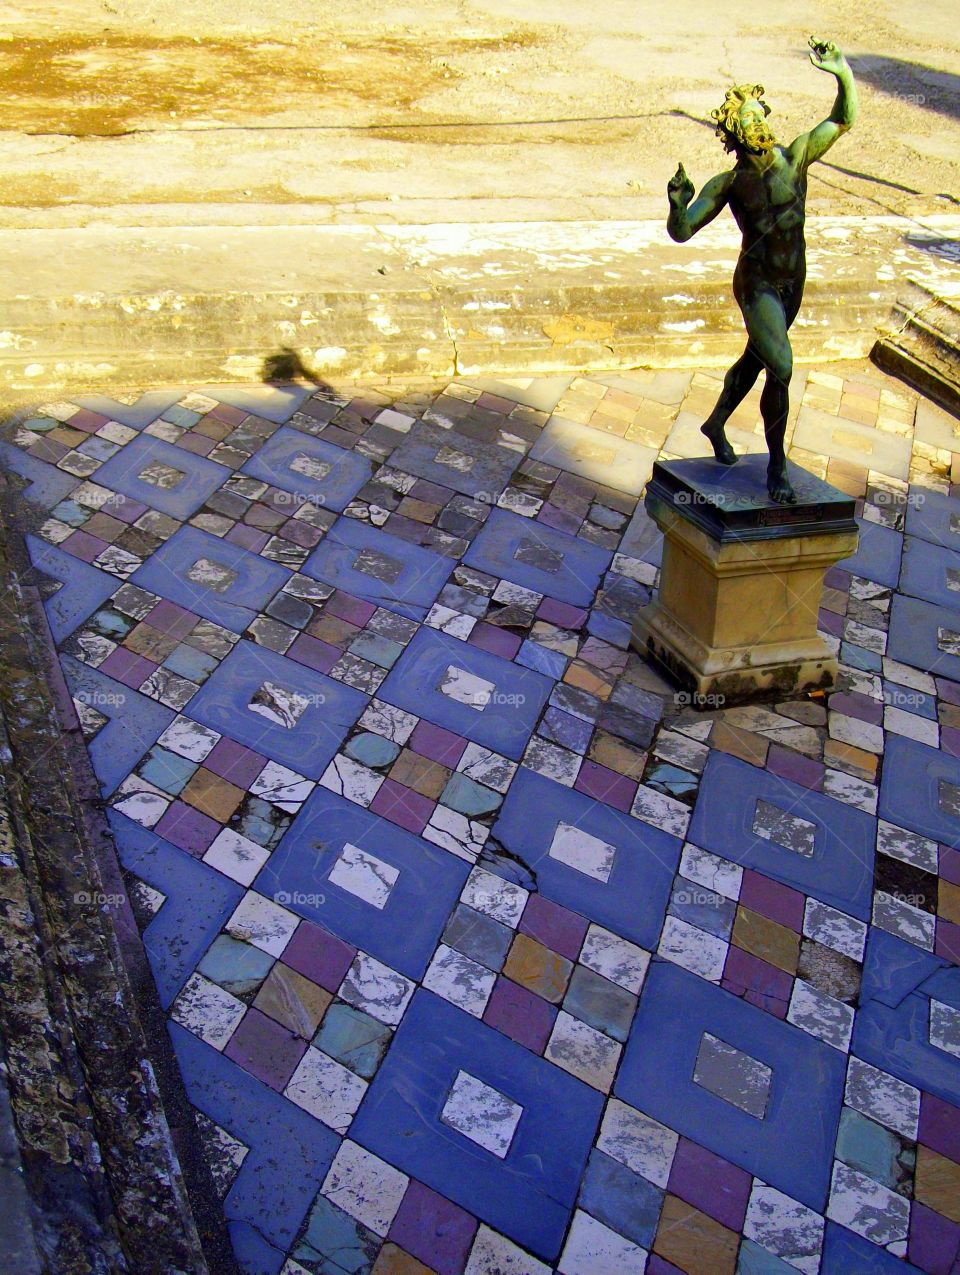 Restored statue and tile work in a small fountain amongst the ancient ruins of Pompeii